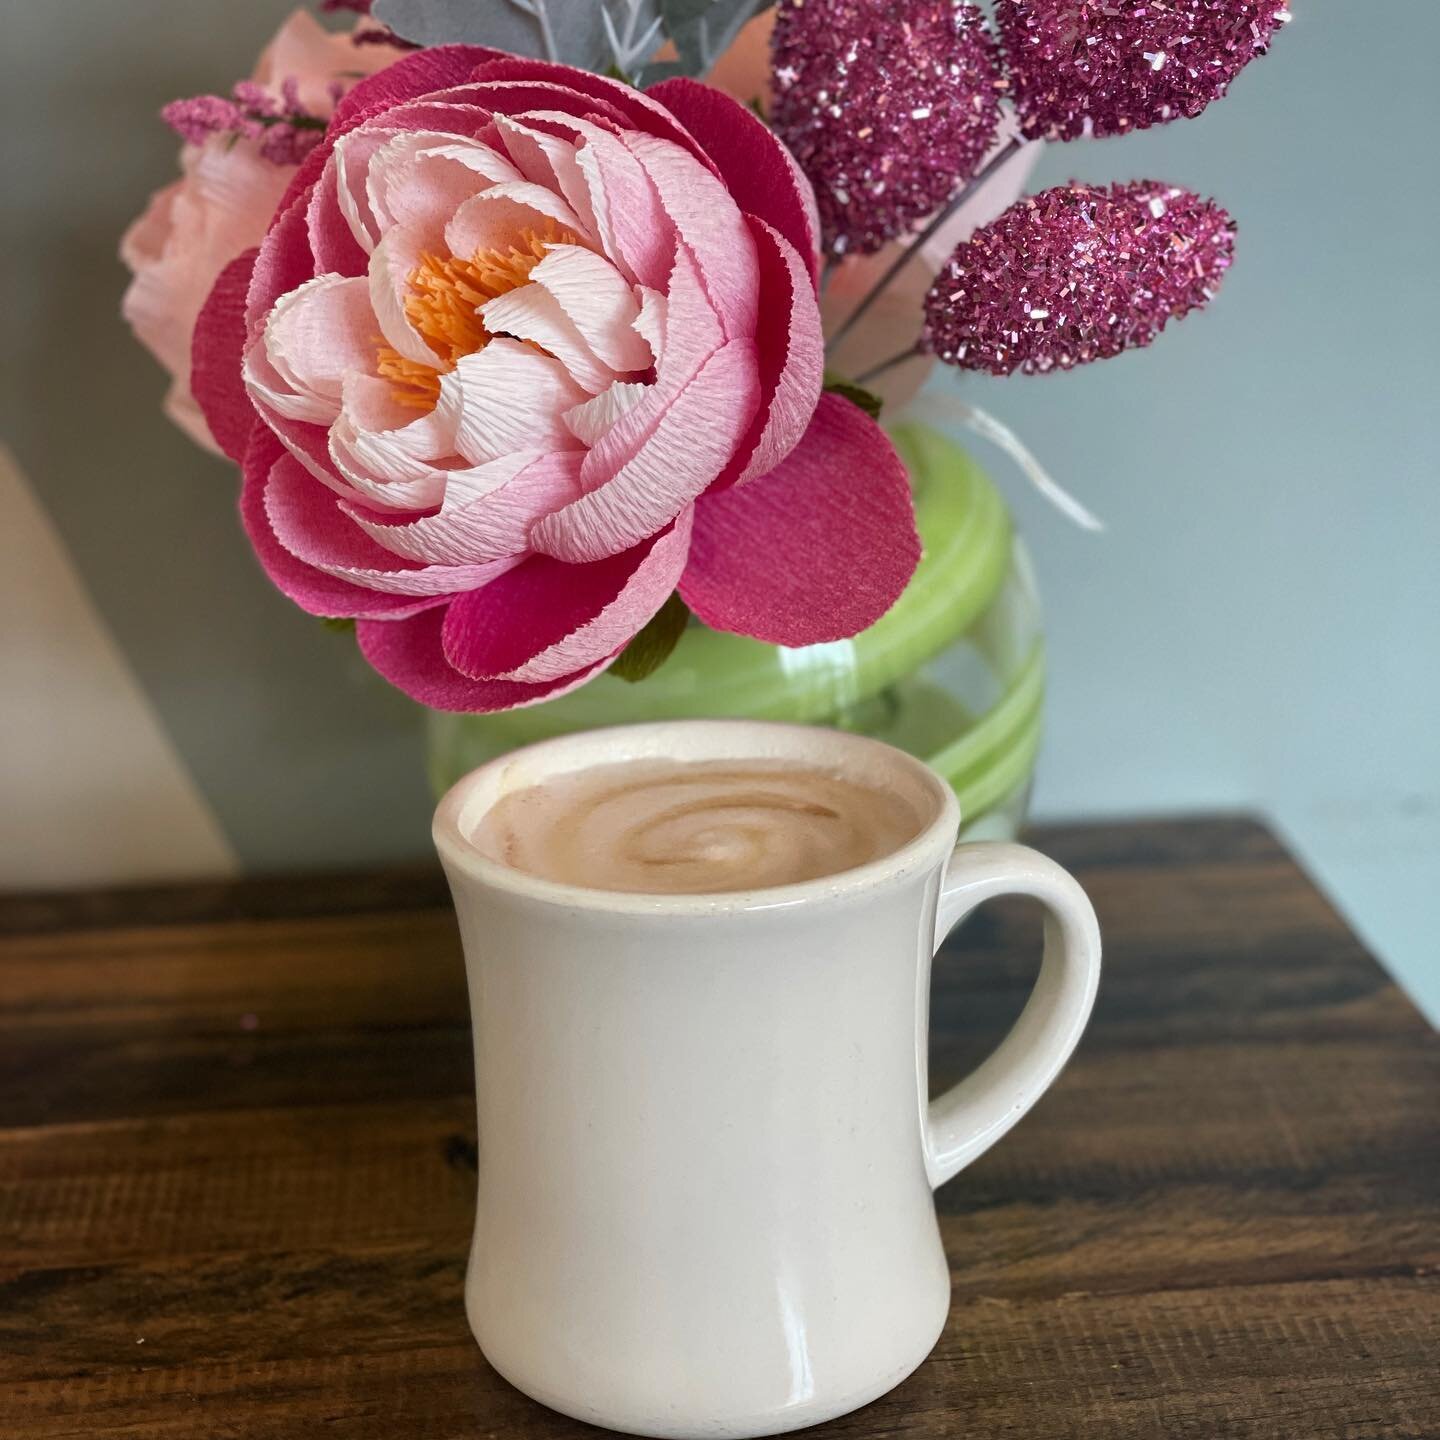 Enjoying a hot cup of coffee on a rainy day. 
.
.
📍@themoonbakeshop
.
.
#CraftCoffeeTrail #CraftCoffee #DrinkCoffee #DrinkLocal #BrewLocal #SupportLocal #DowntownHsv #DowntownHuntsville #exploredowntown #ihearthsv #visithuntsvilleal #coffeeaddict #c